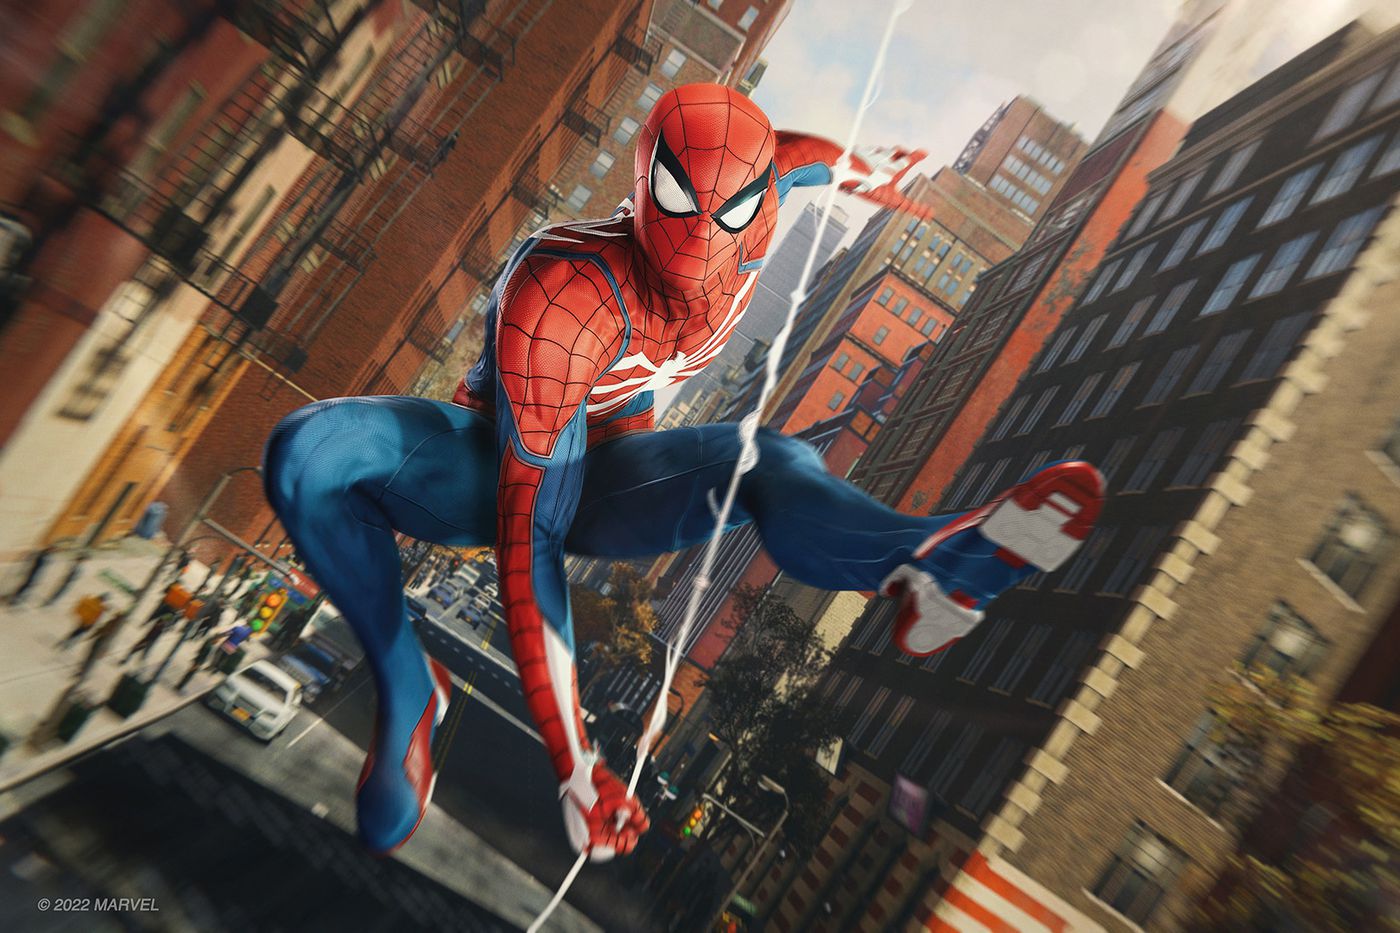 Marvel's Spider-Man 2 could launch